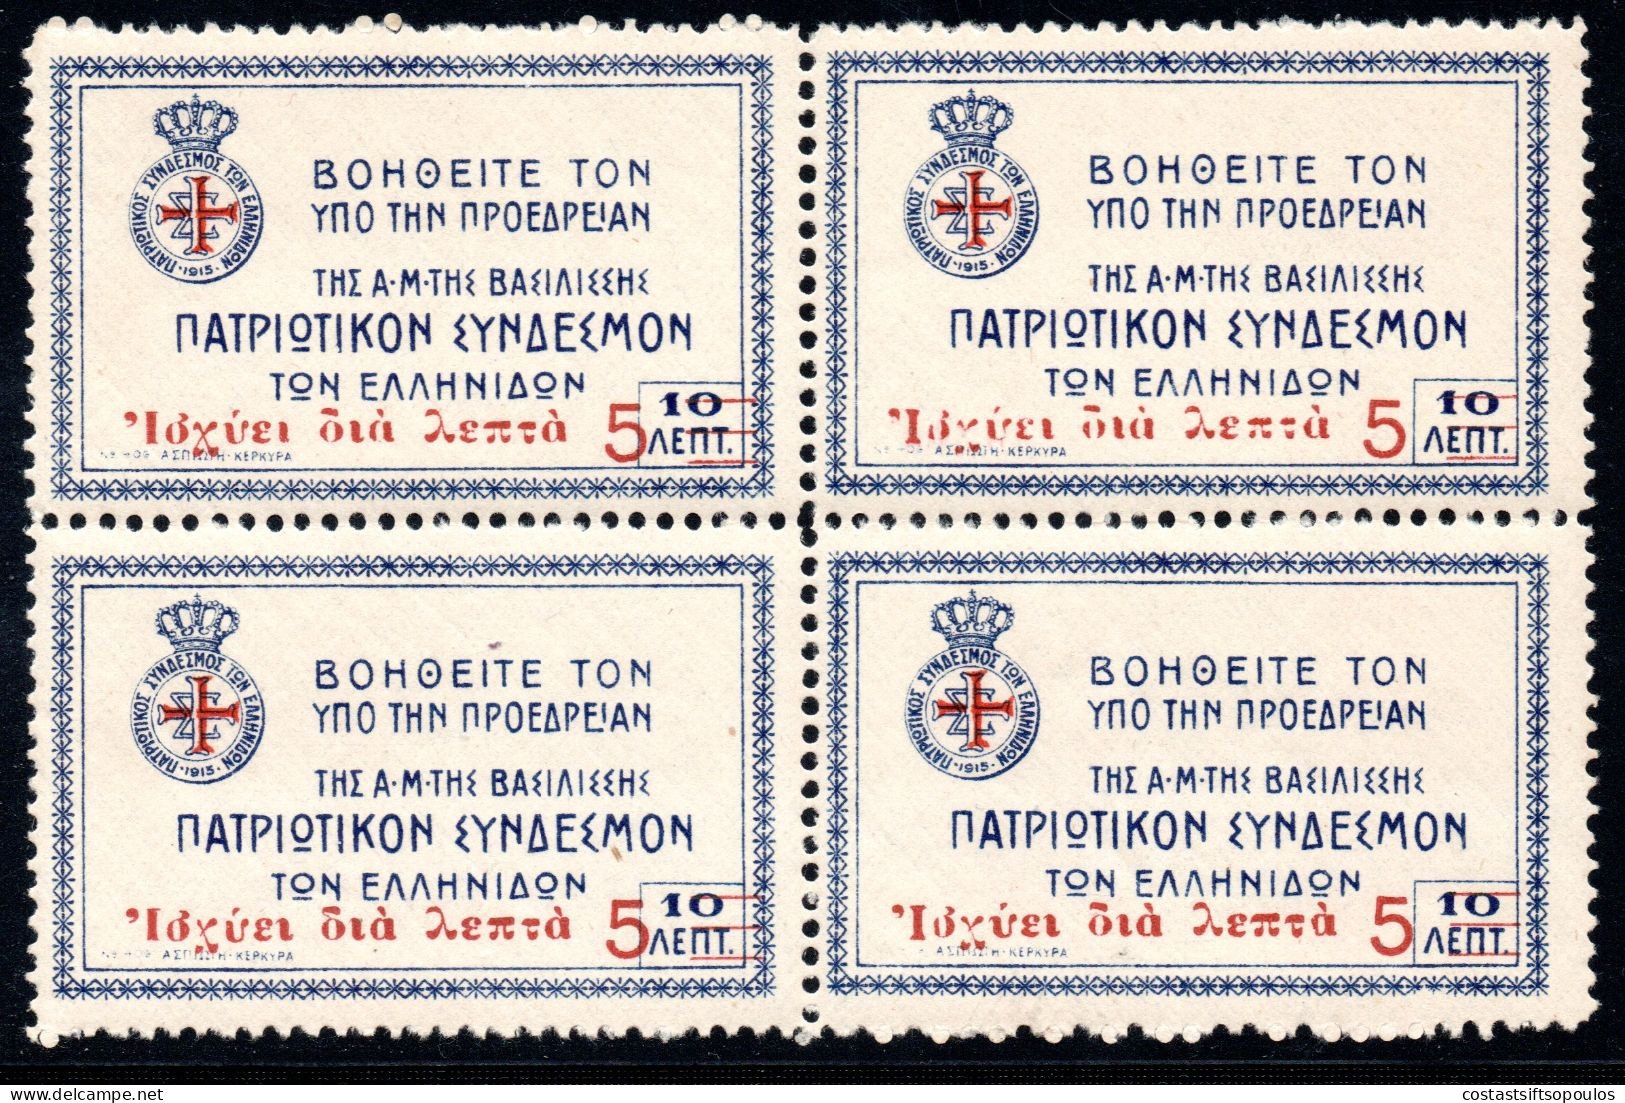 1787.GREECE.1922 CHARITY 5 L / 10 L. HELLAS  C56a MNH BLOCK OF 4. DOES NOT LOOK GENUINE,SOLD AS IS,SPACE FILLER. - Wohlfahrtsmarken